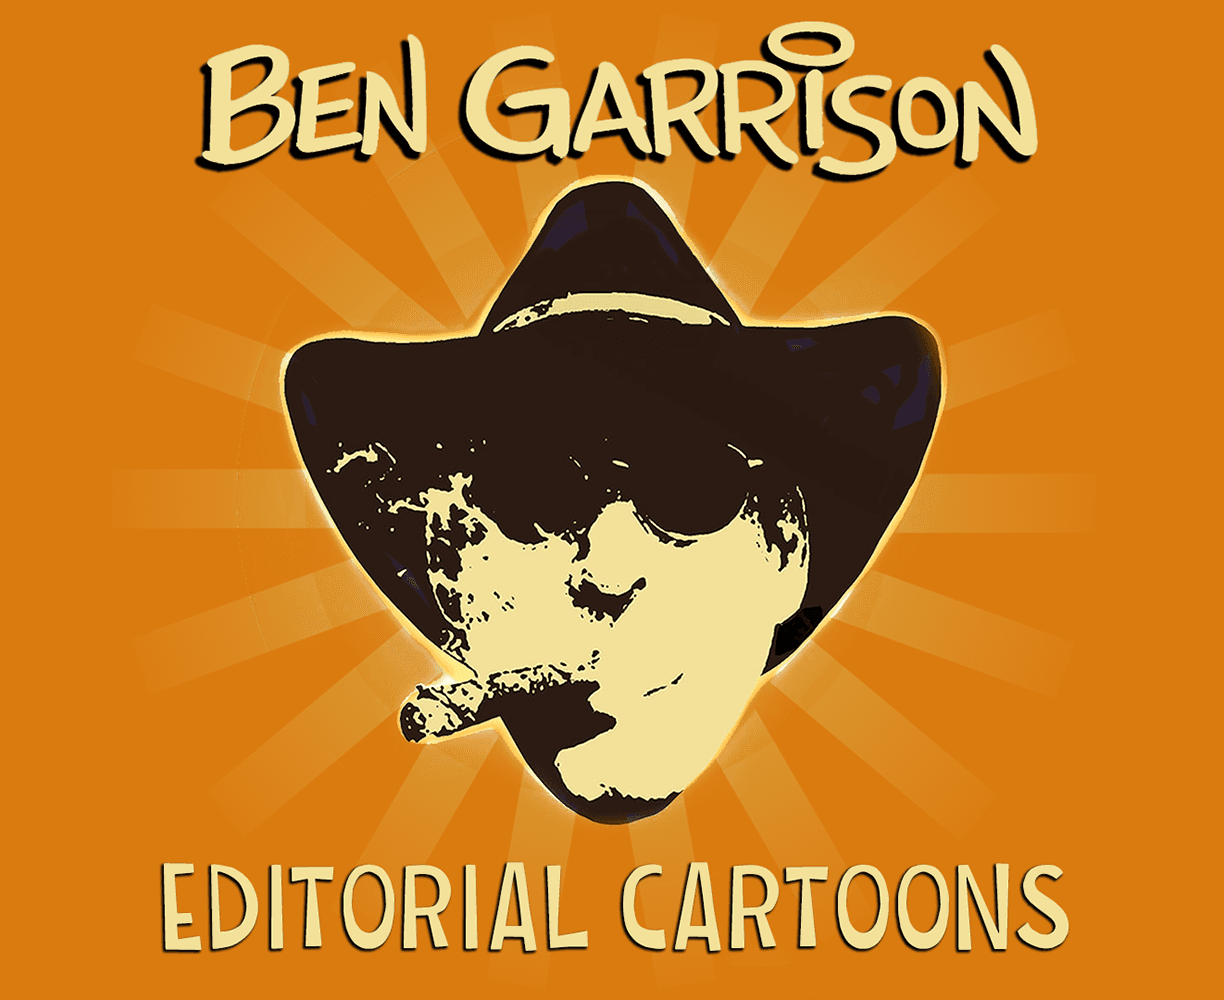 The cover art for the episode Let Them Eat Cake from the comics series Ben Garrison, which is number 143 in the series